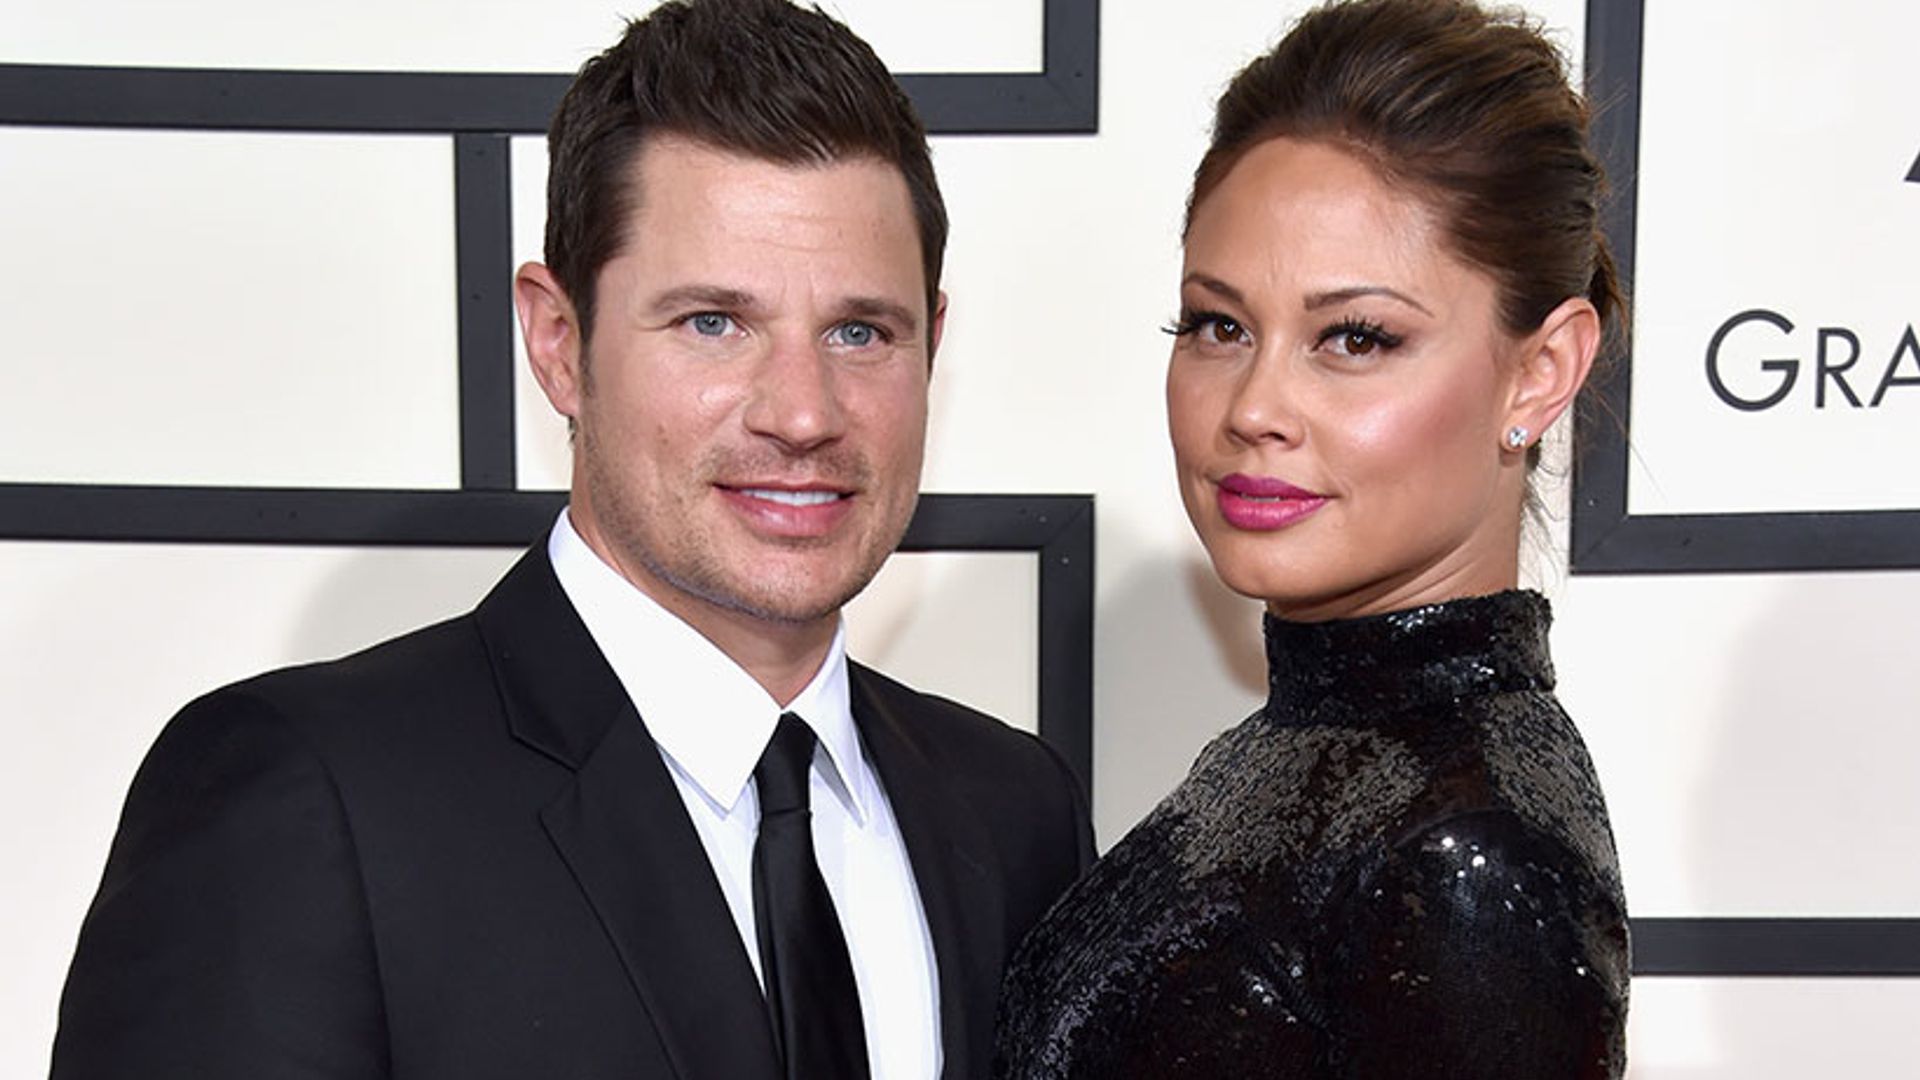 See the adorable video as Nick Lachey finds out the gender of his unborn baby!